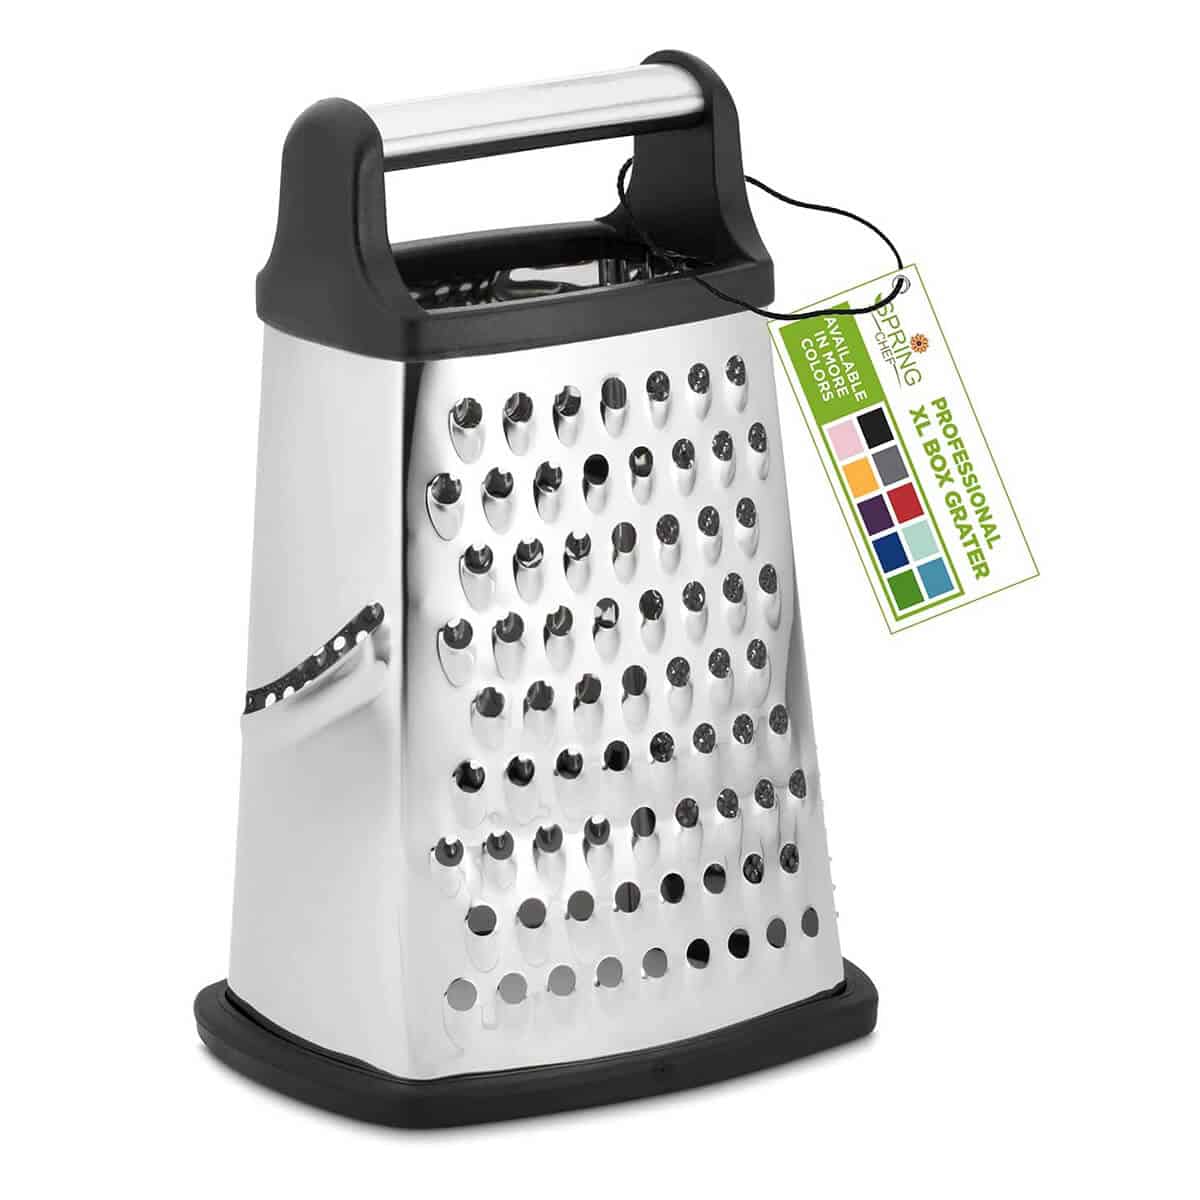 box cheese grater.